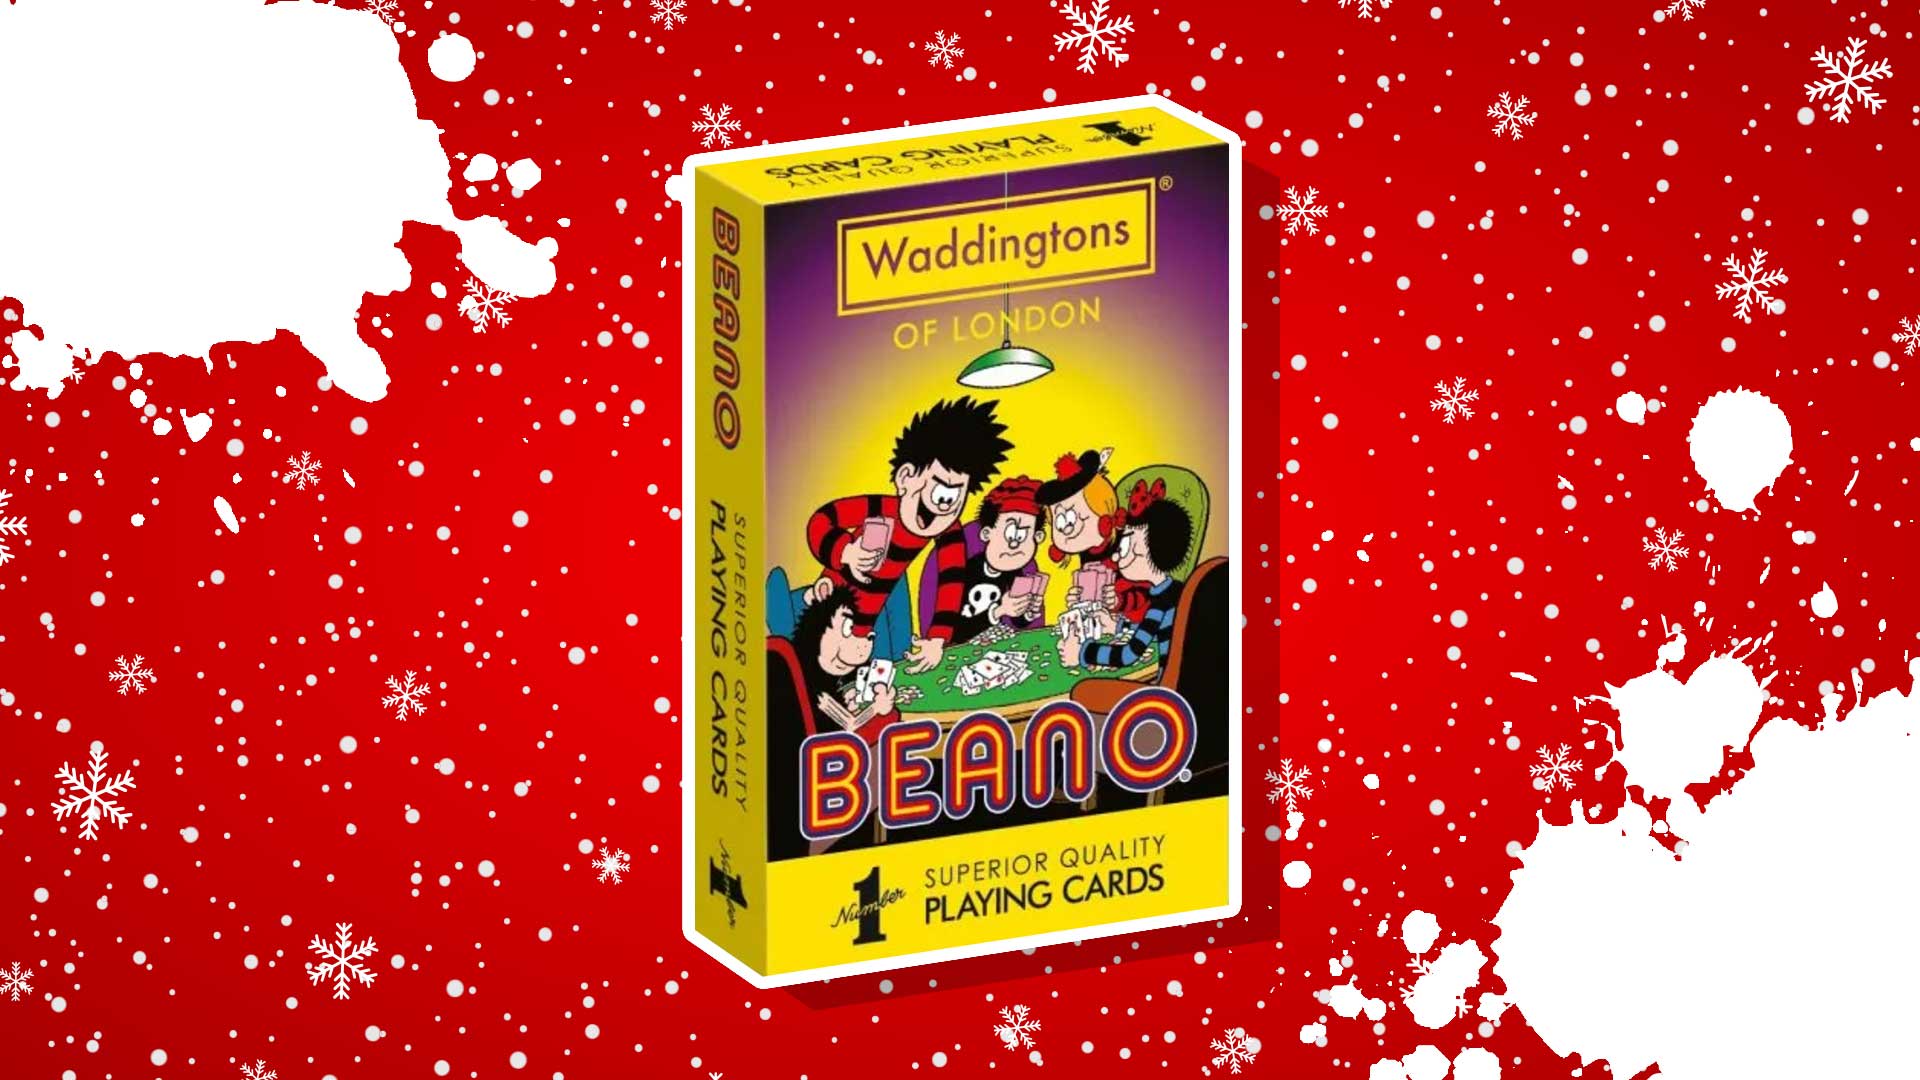 Beano Playing Cards by Waddingtons 